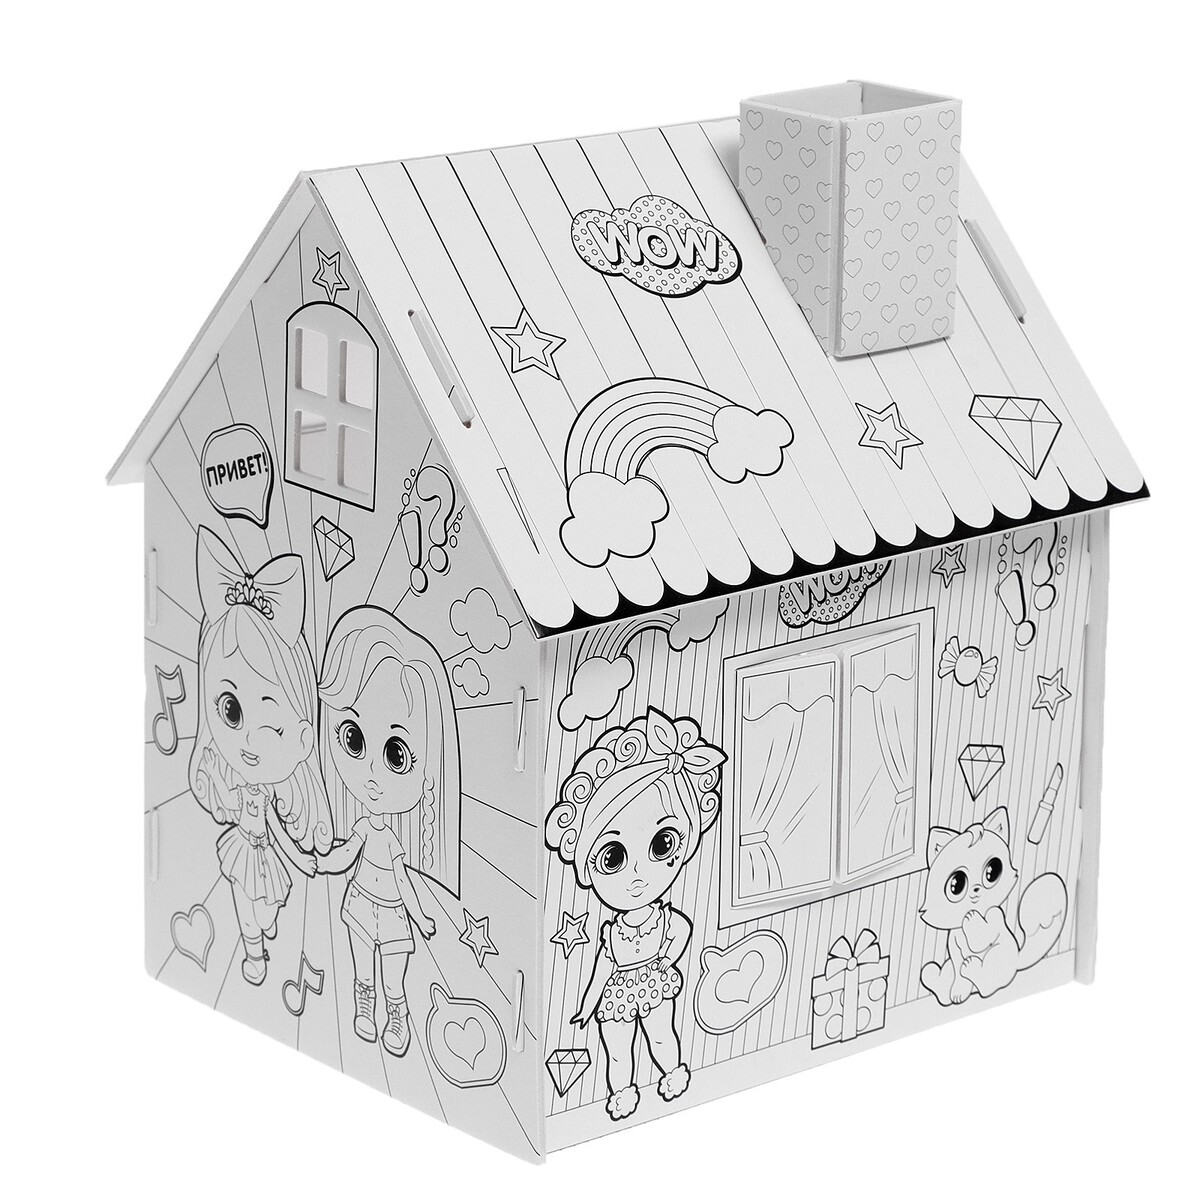 Quirky house wish game price coloring book